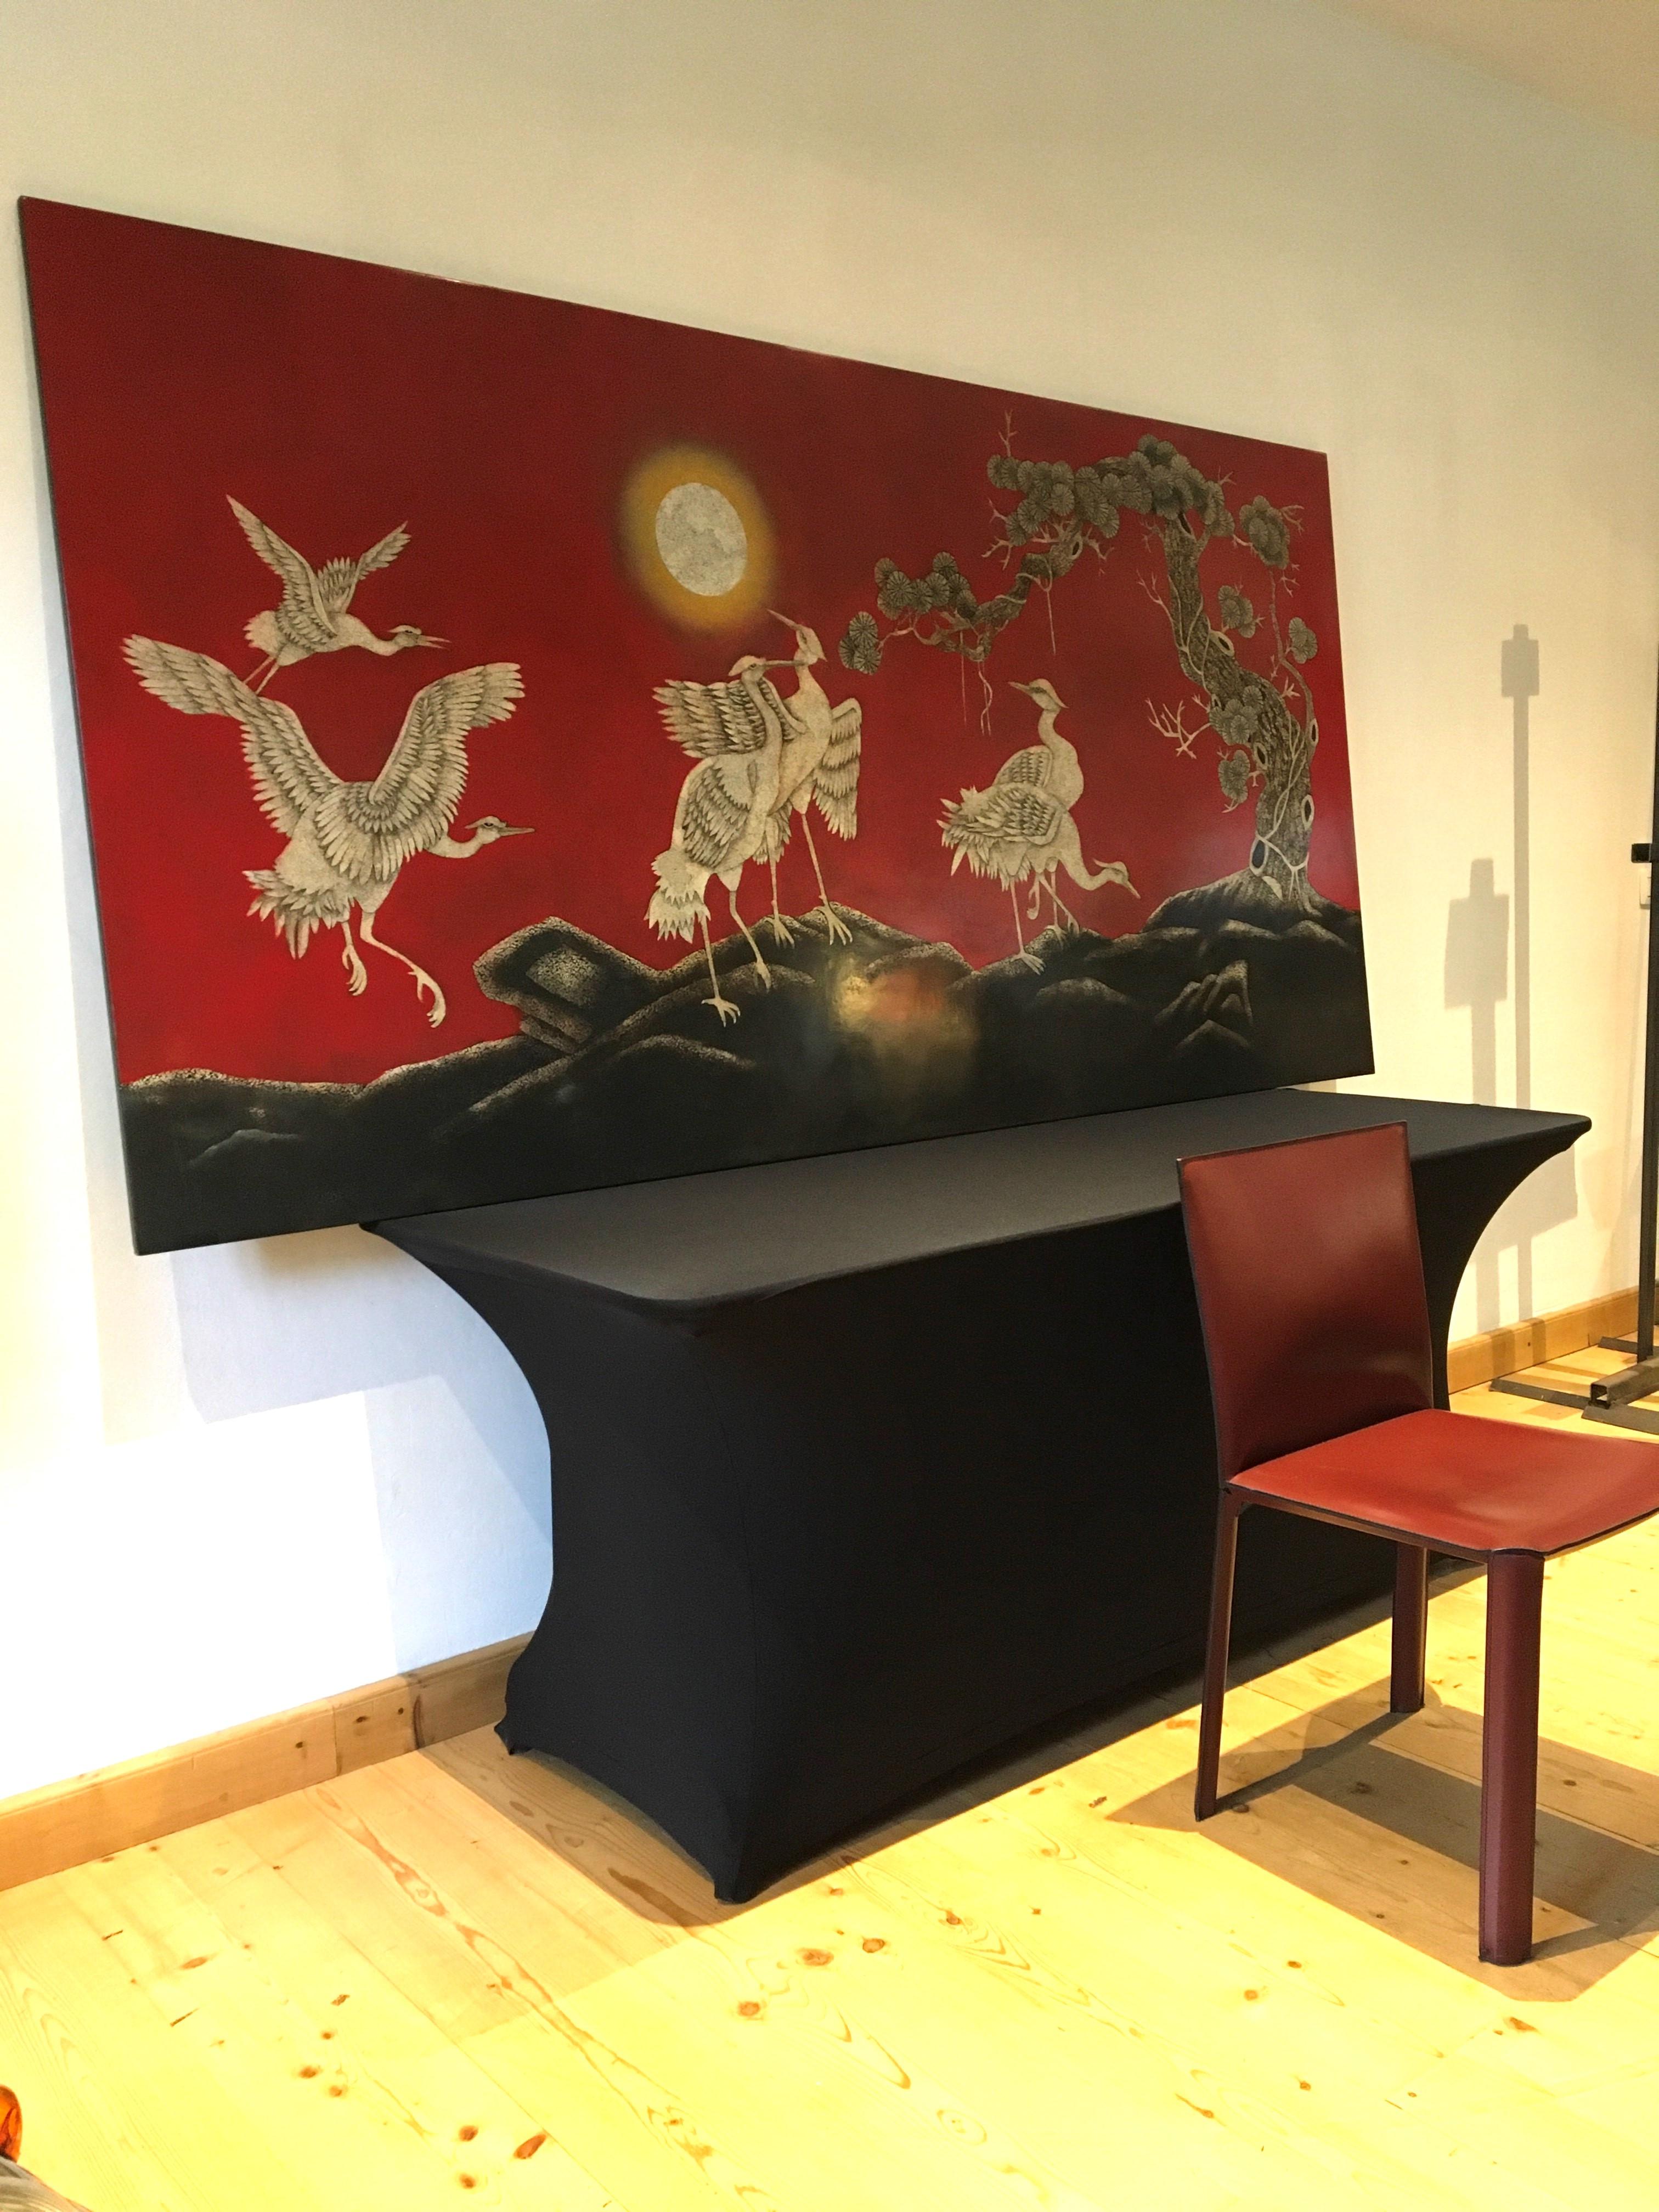 Stunning large Asian wall panel with cranes. This red art panel shows a beautiful landscape with 6 crane birds, the sun and an asian tree. It's stunning by his color and by size : 96,06 inch or 244 cm long ! 
It's a red wooden panel with black